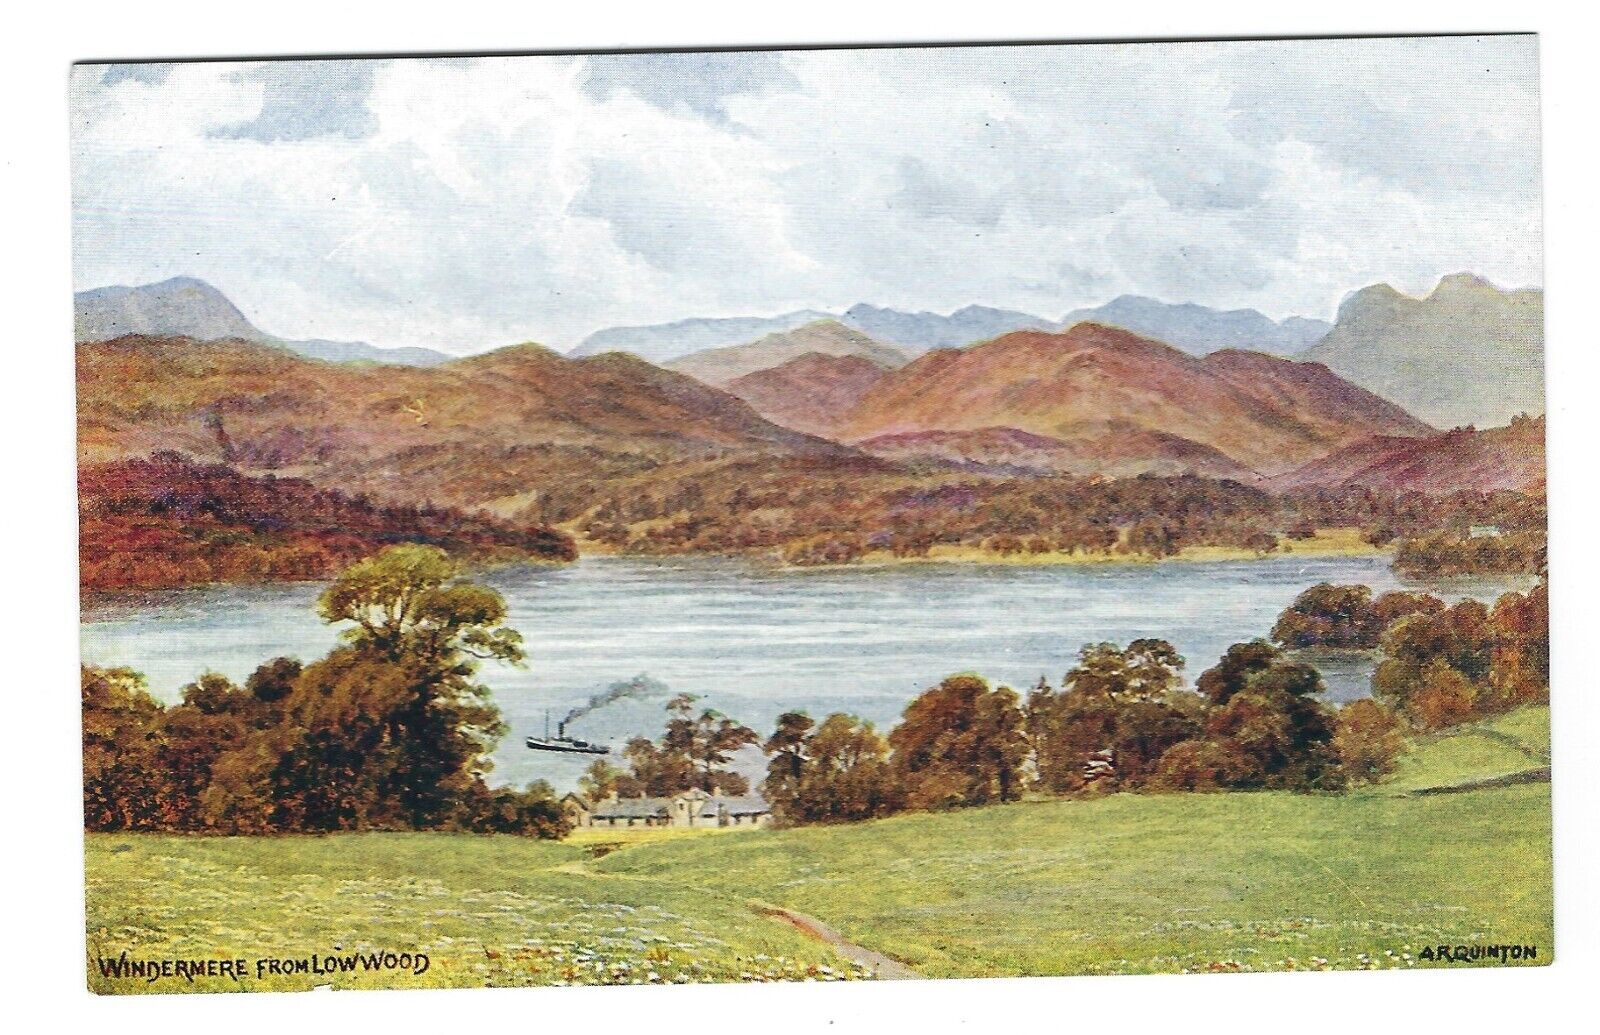 House Clearance - A R Quinton Cumbria ERROR Salmon 1486/96. Lake Windermere from Lowwood. pristine